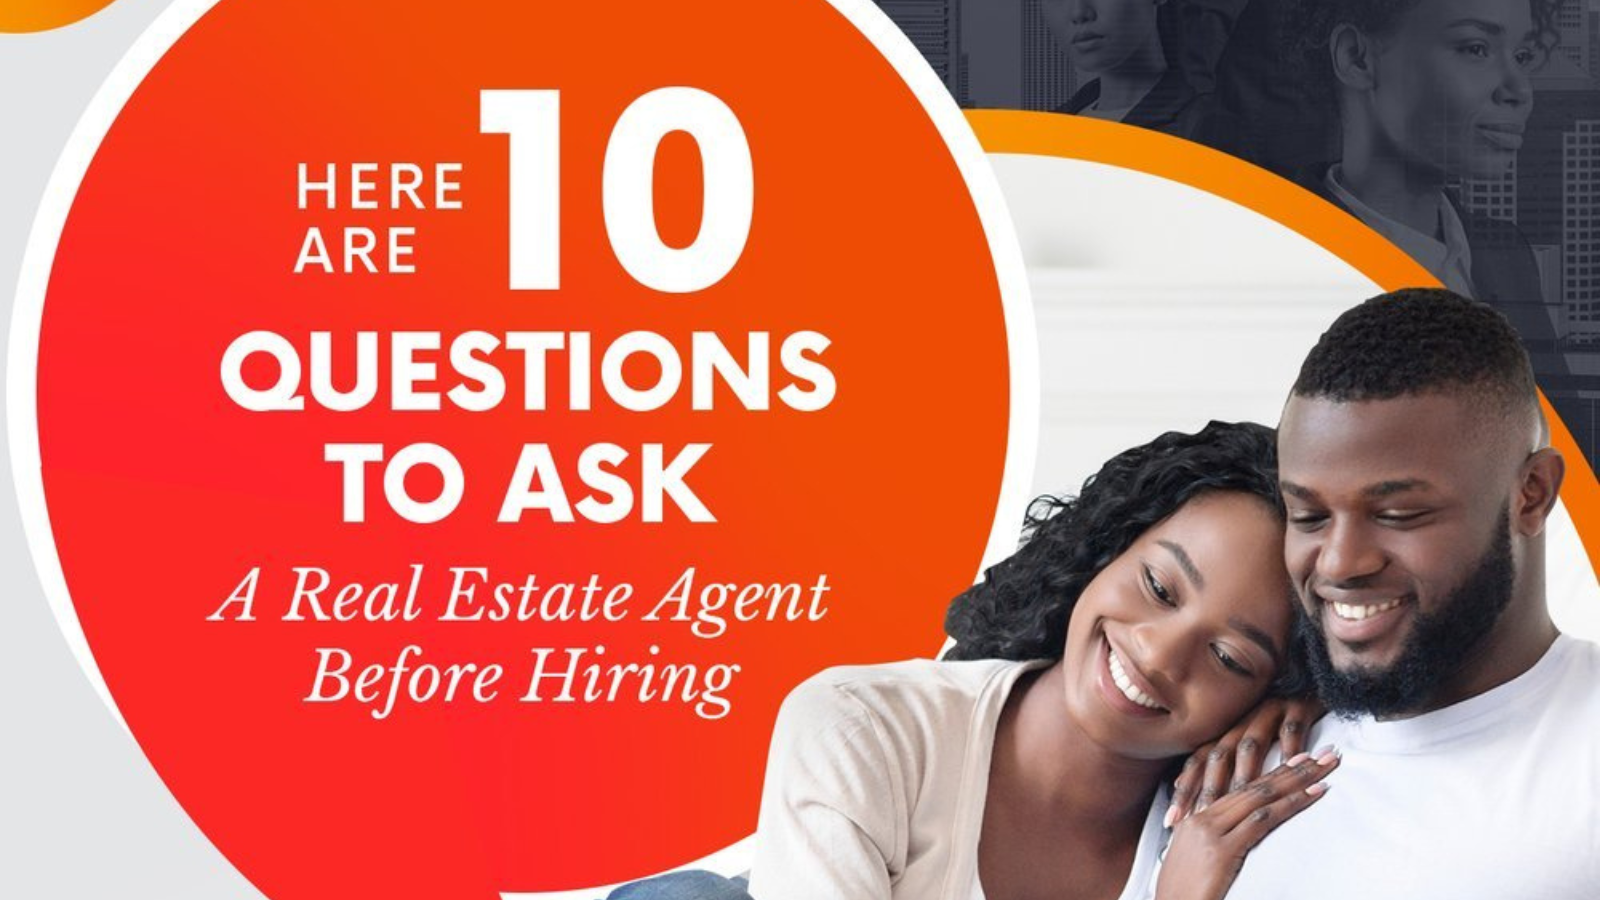 10 Essential Questions to Ask When Hiring a Real Estate Agent to Sell Your Bay Area Home